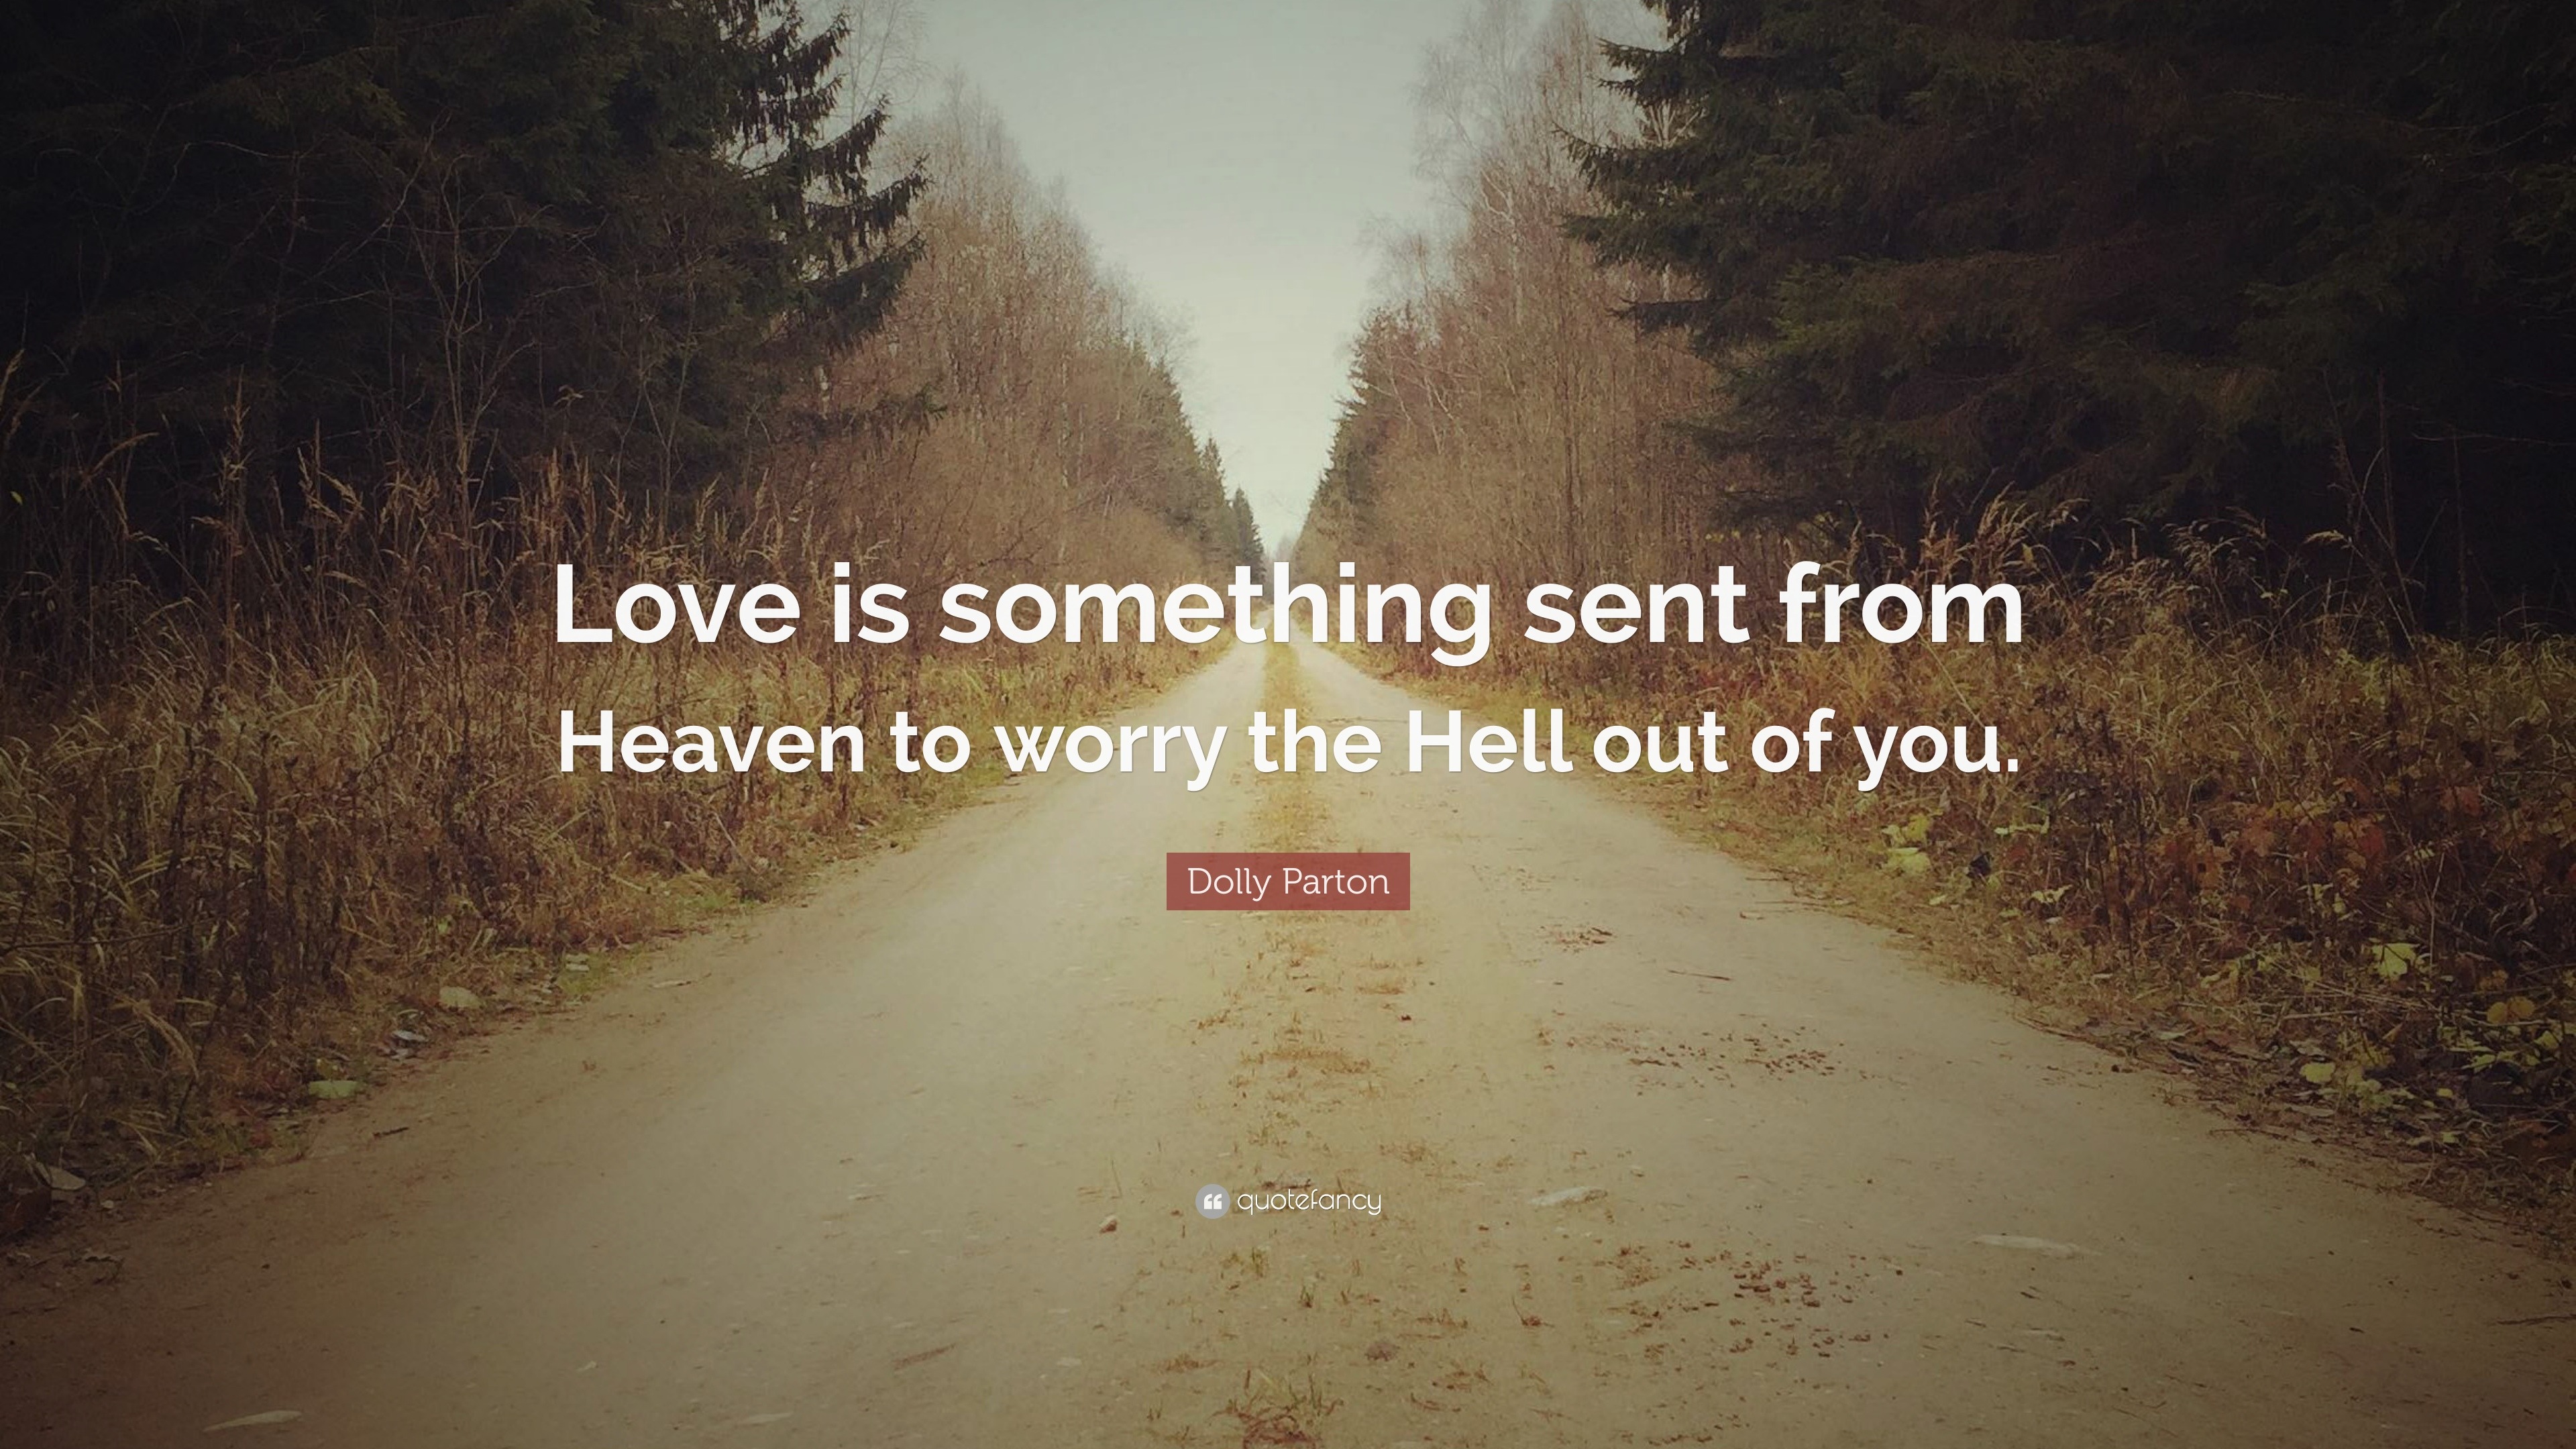 Dolly Parton Quote “Love is something sent from Heaven to worry the Hell out